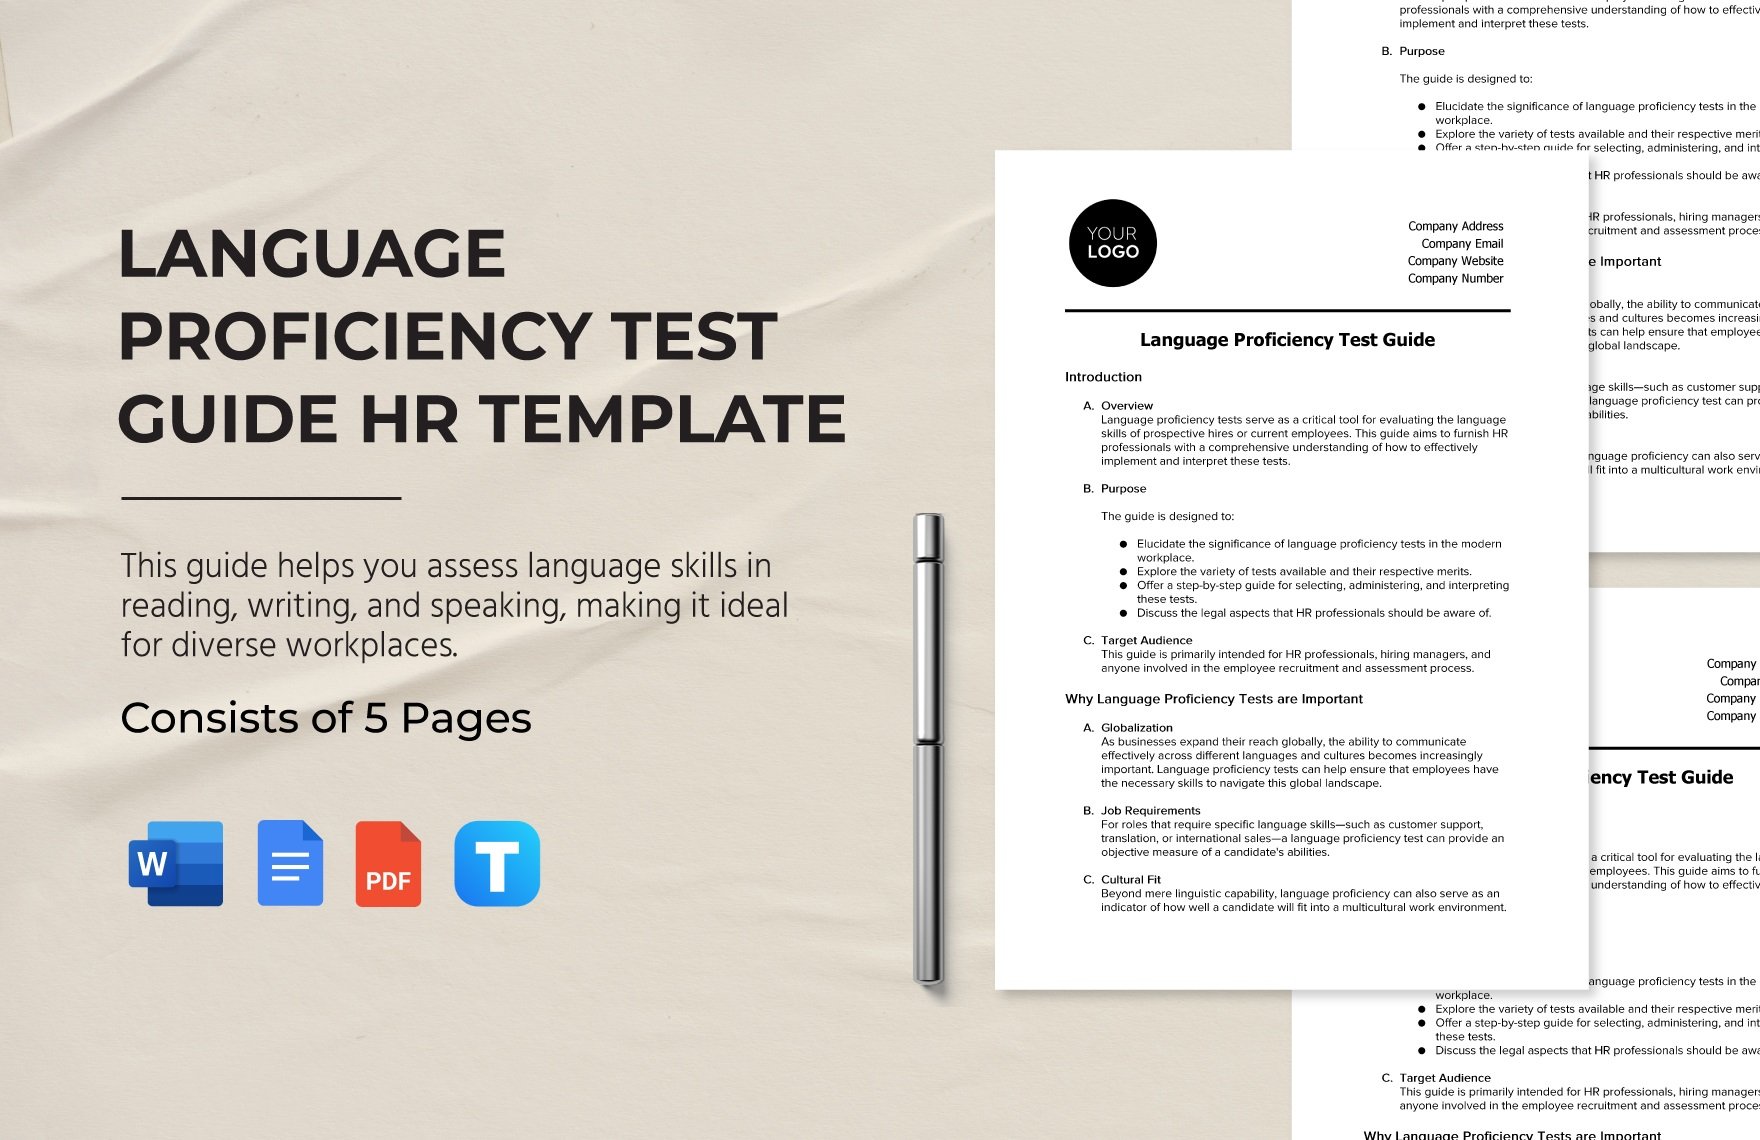 Language Proficiency Test Guide HR Template in Word, Google Docs, PDF